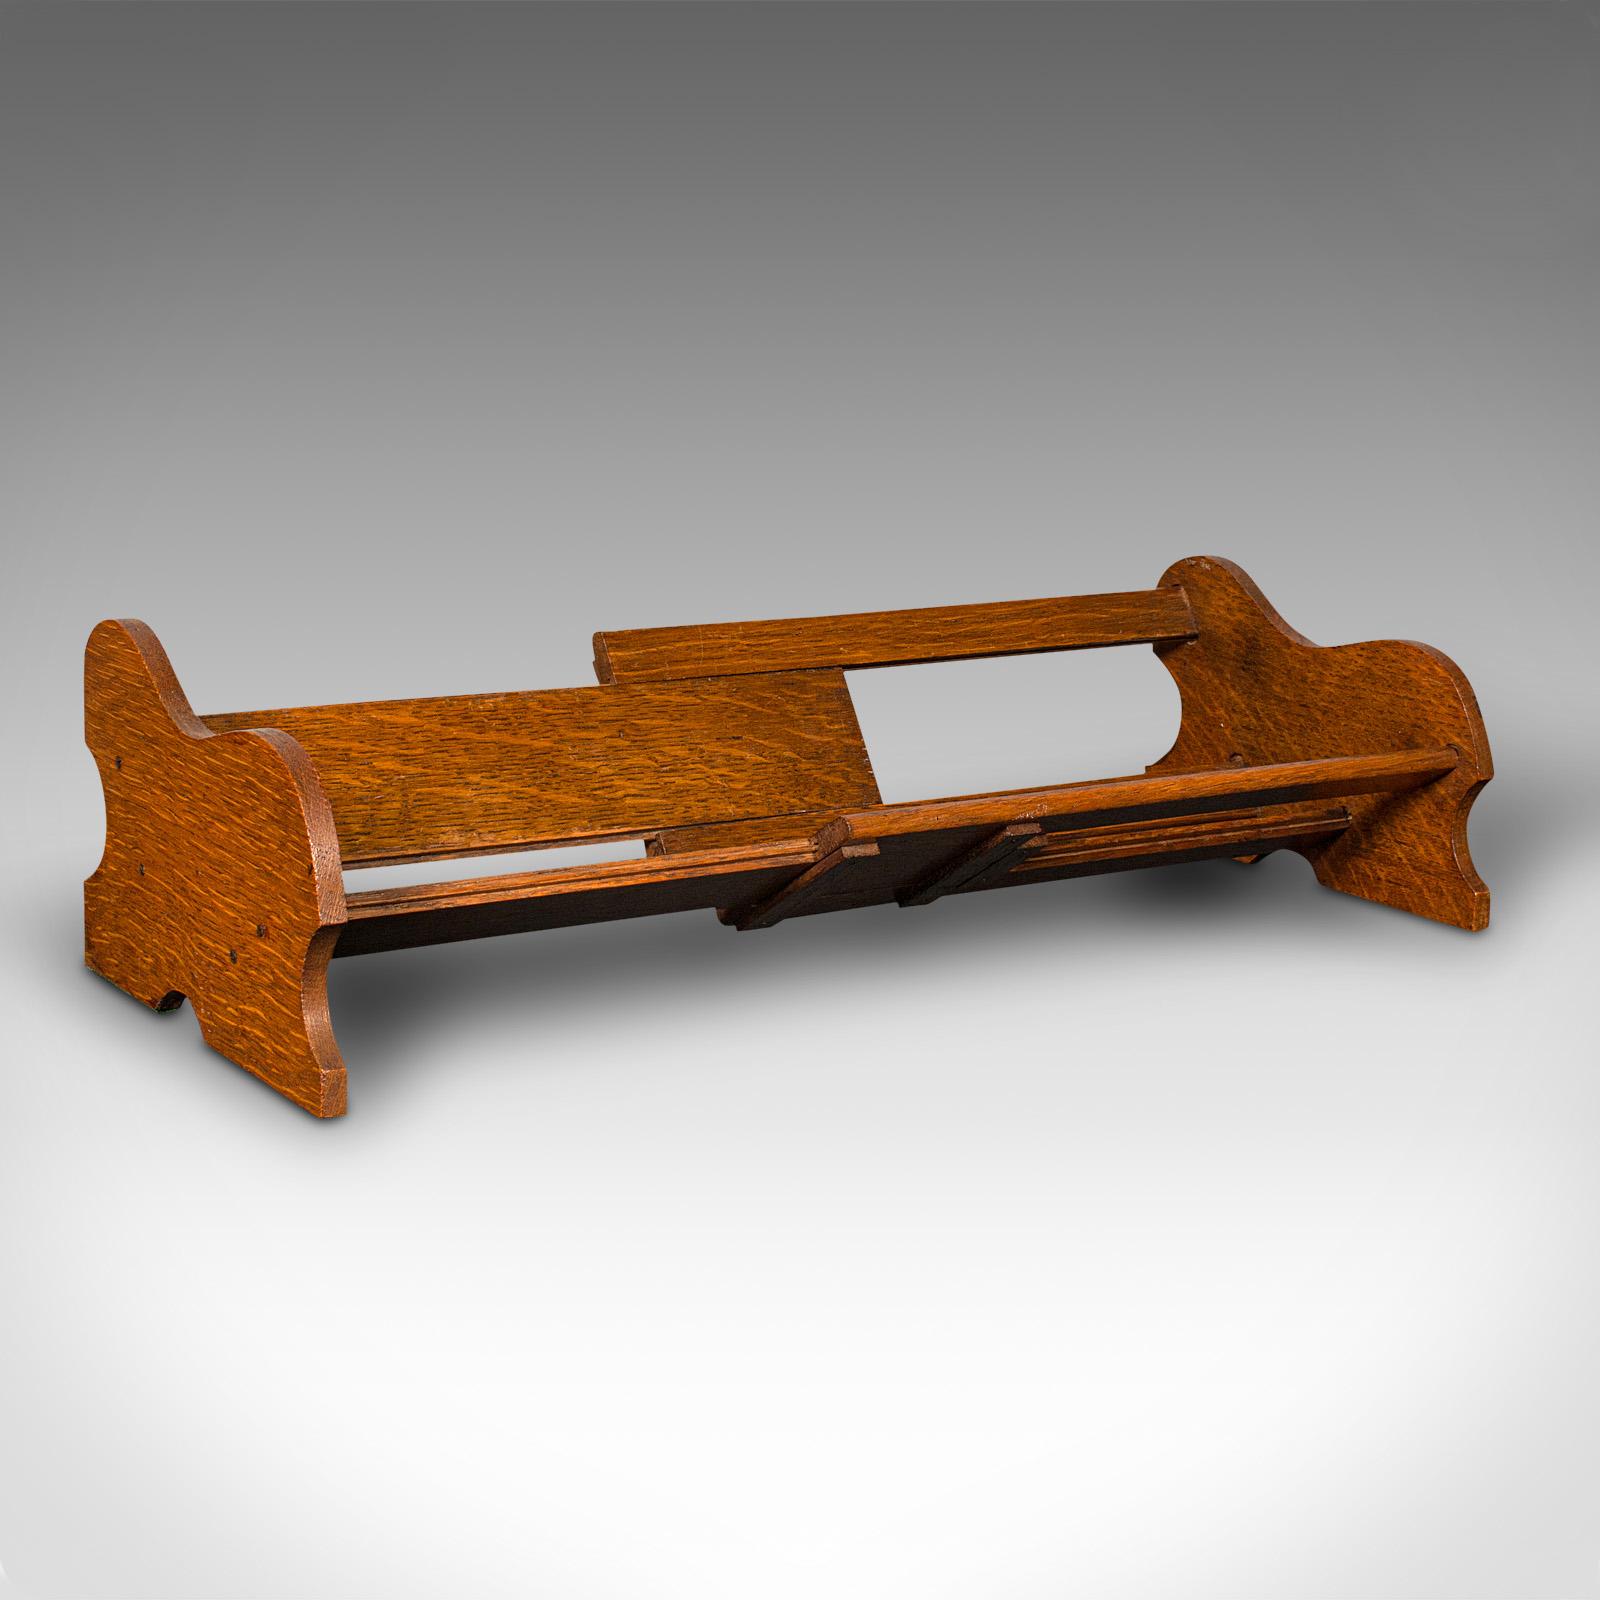 This is a pair of antique extending novel rests. An English, oak book trough, dating to the Edwardian period, circa 1910.

Fascinating as a pair, each extending to accommodate further favourites
Displaying a desirable aged patina and in good